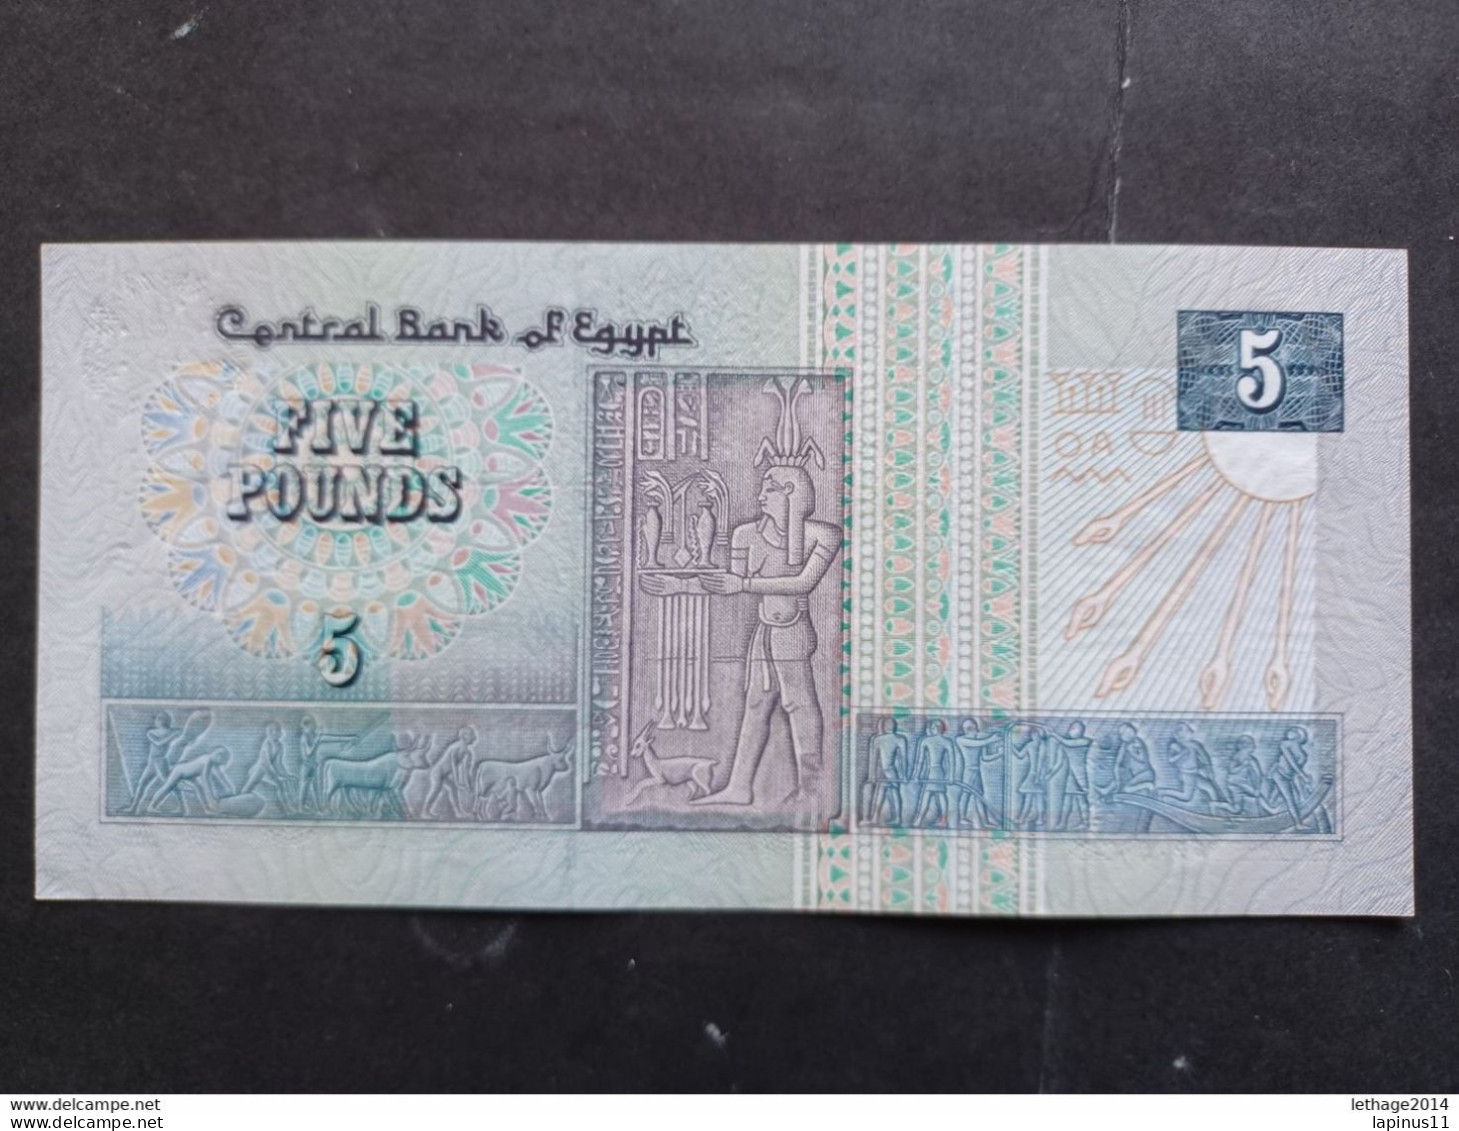 BANKNOTE EGYPT EGYPT 5 POUNDS 1993 UNCIRCULATED - Egypt